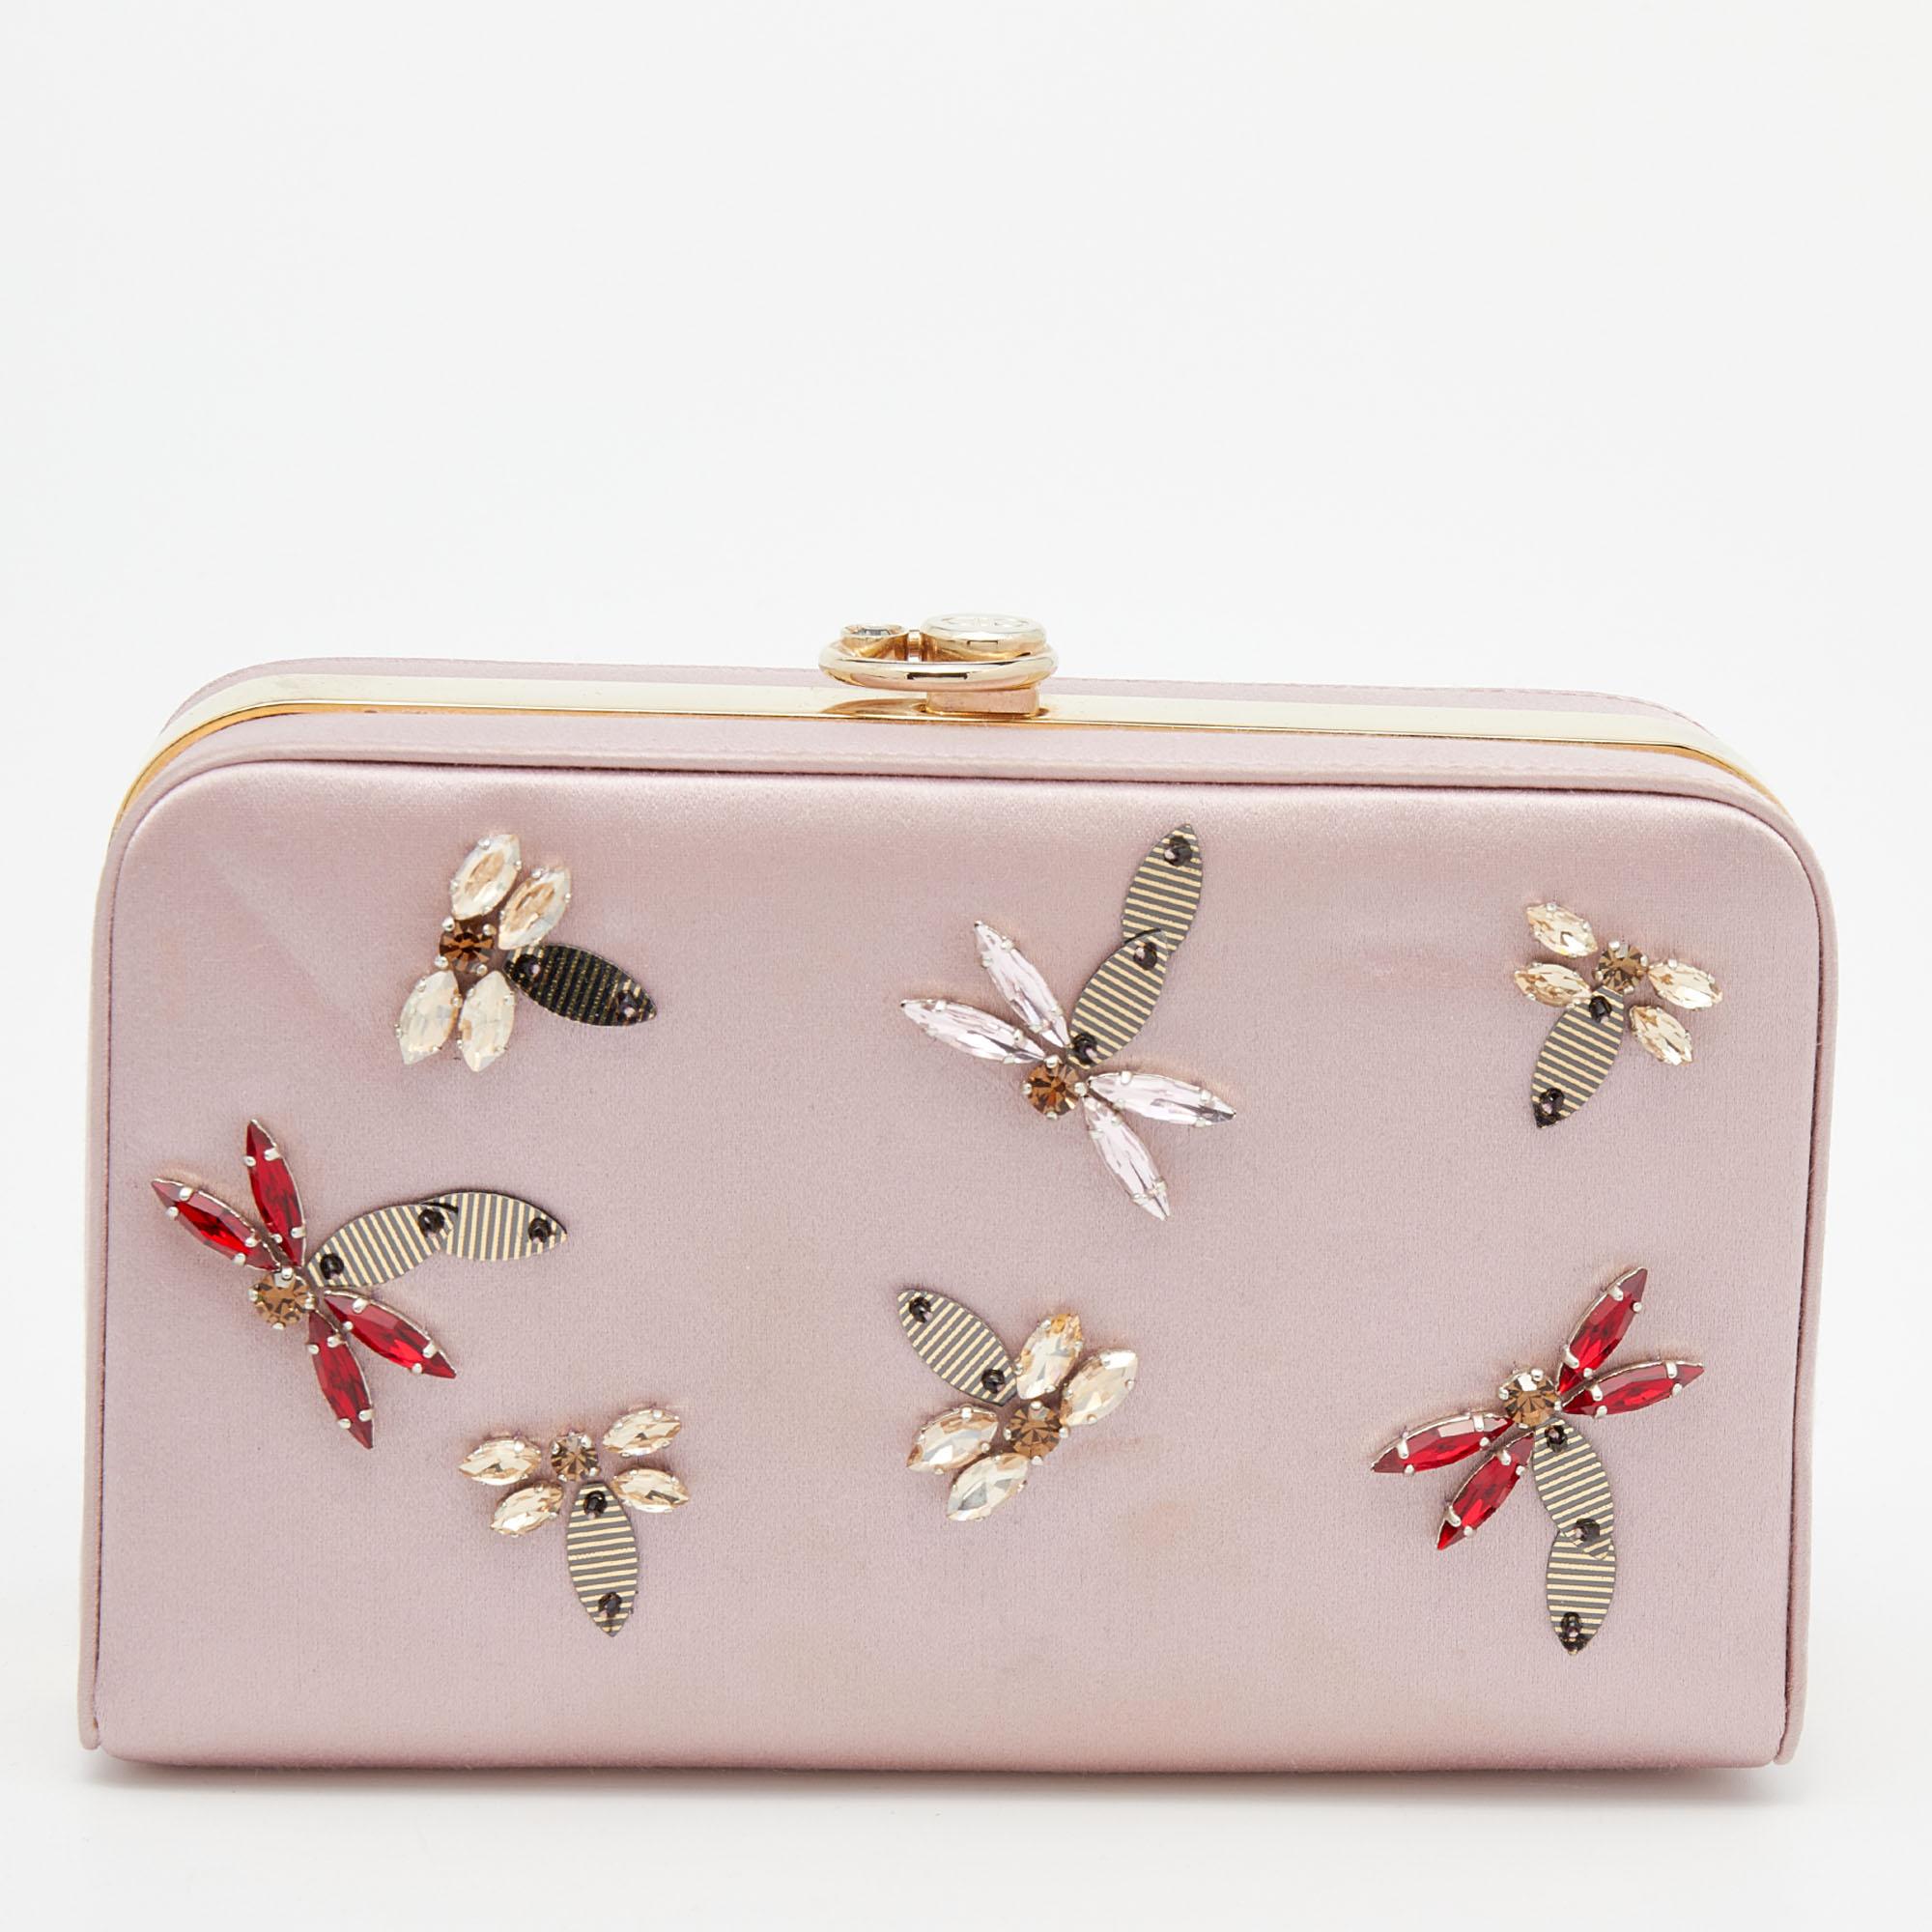 This clutch from Dior has been made using satin into a simple shape and elevated with colorful crystal embellishments. It has a lined interior secured by a top clasp.

Includes: Authenticity Card, Info Booklet
